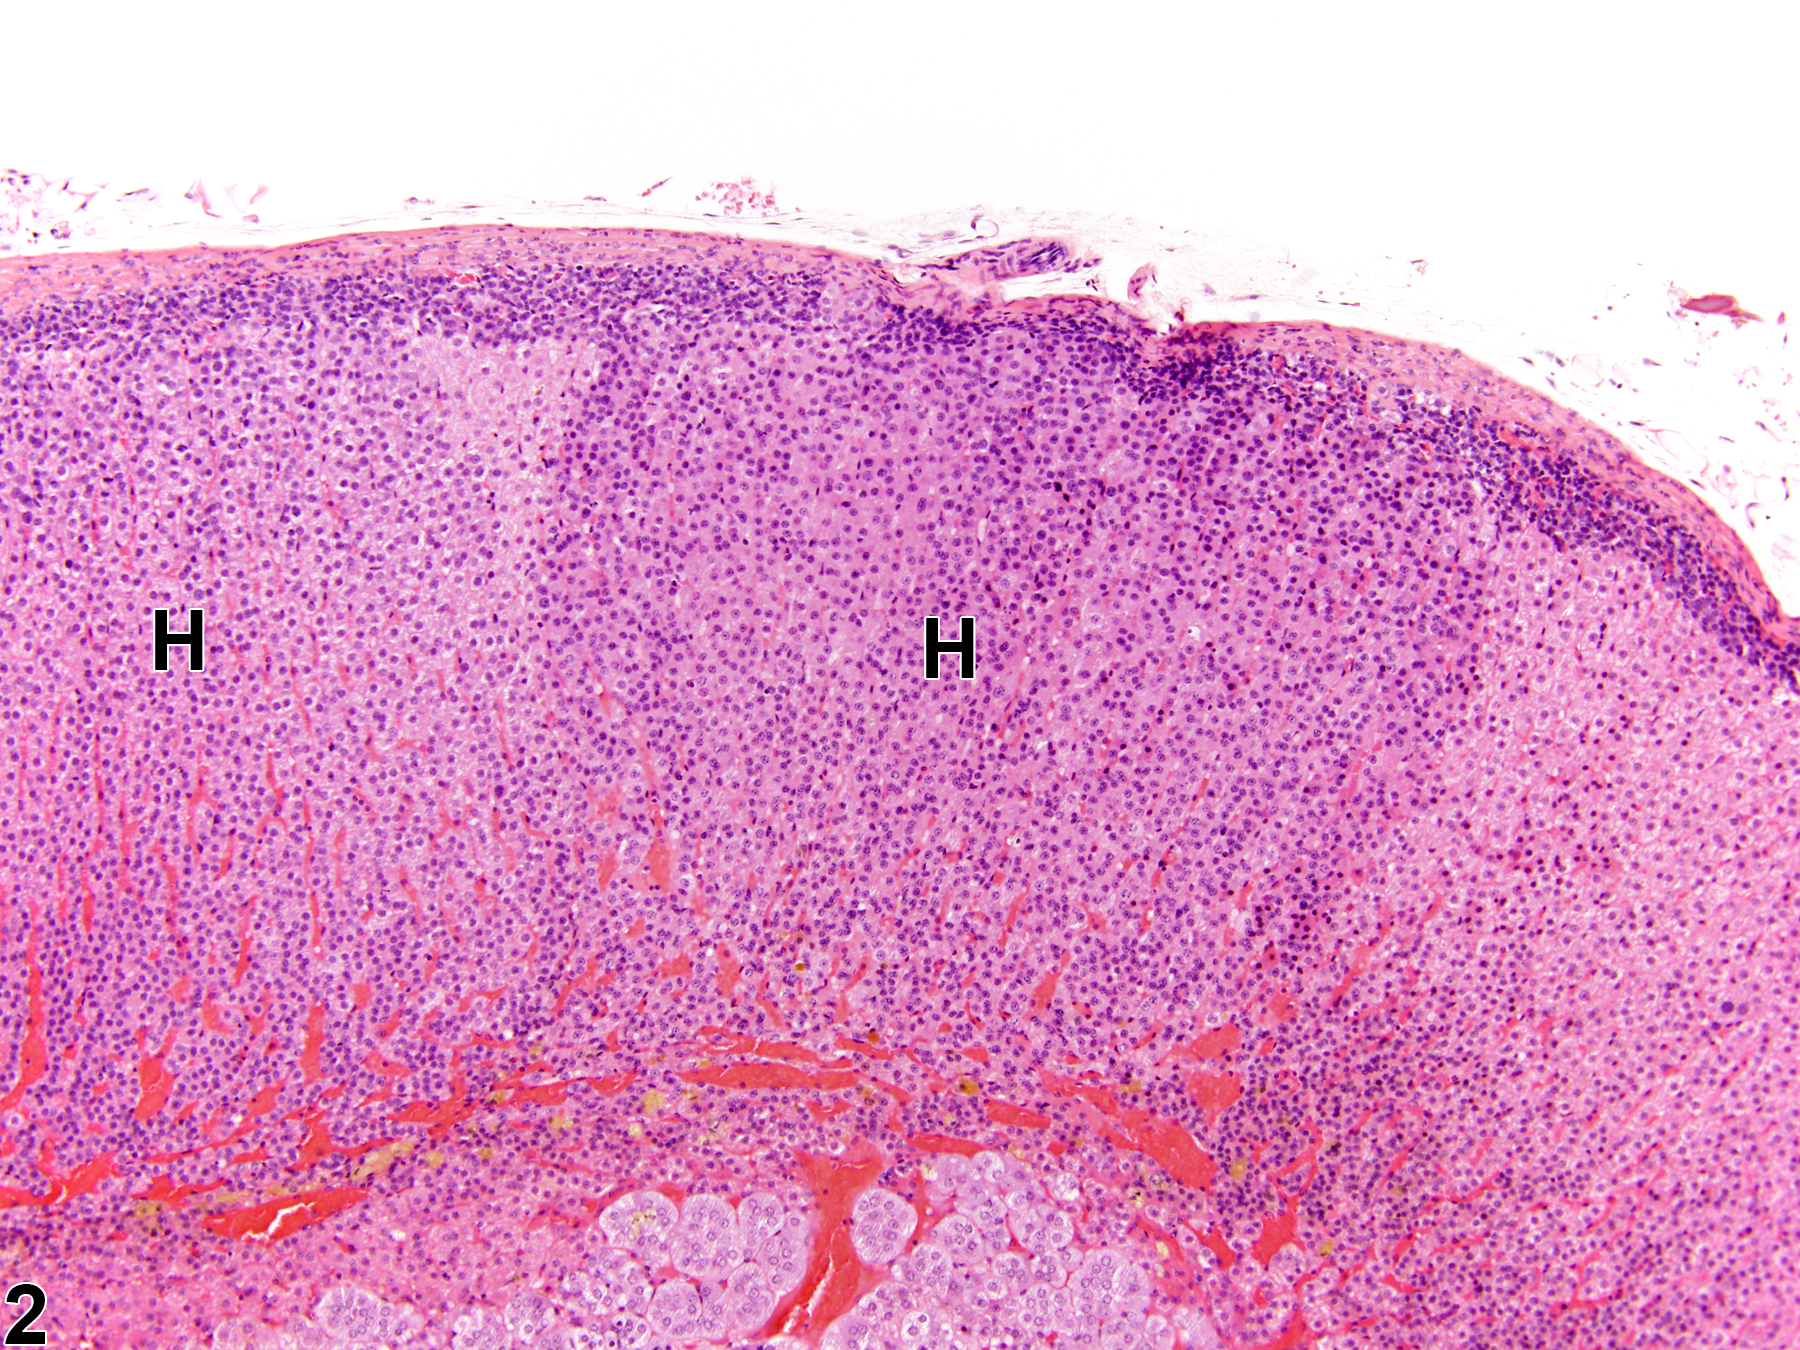 Image of hyperplasia in the adrenal gland cortex from a male Sprague-Dawley rat in a chronic study